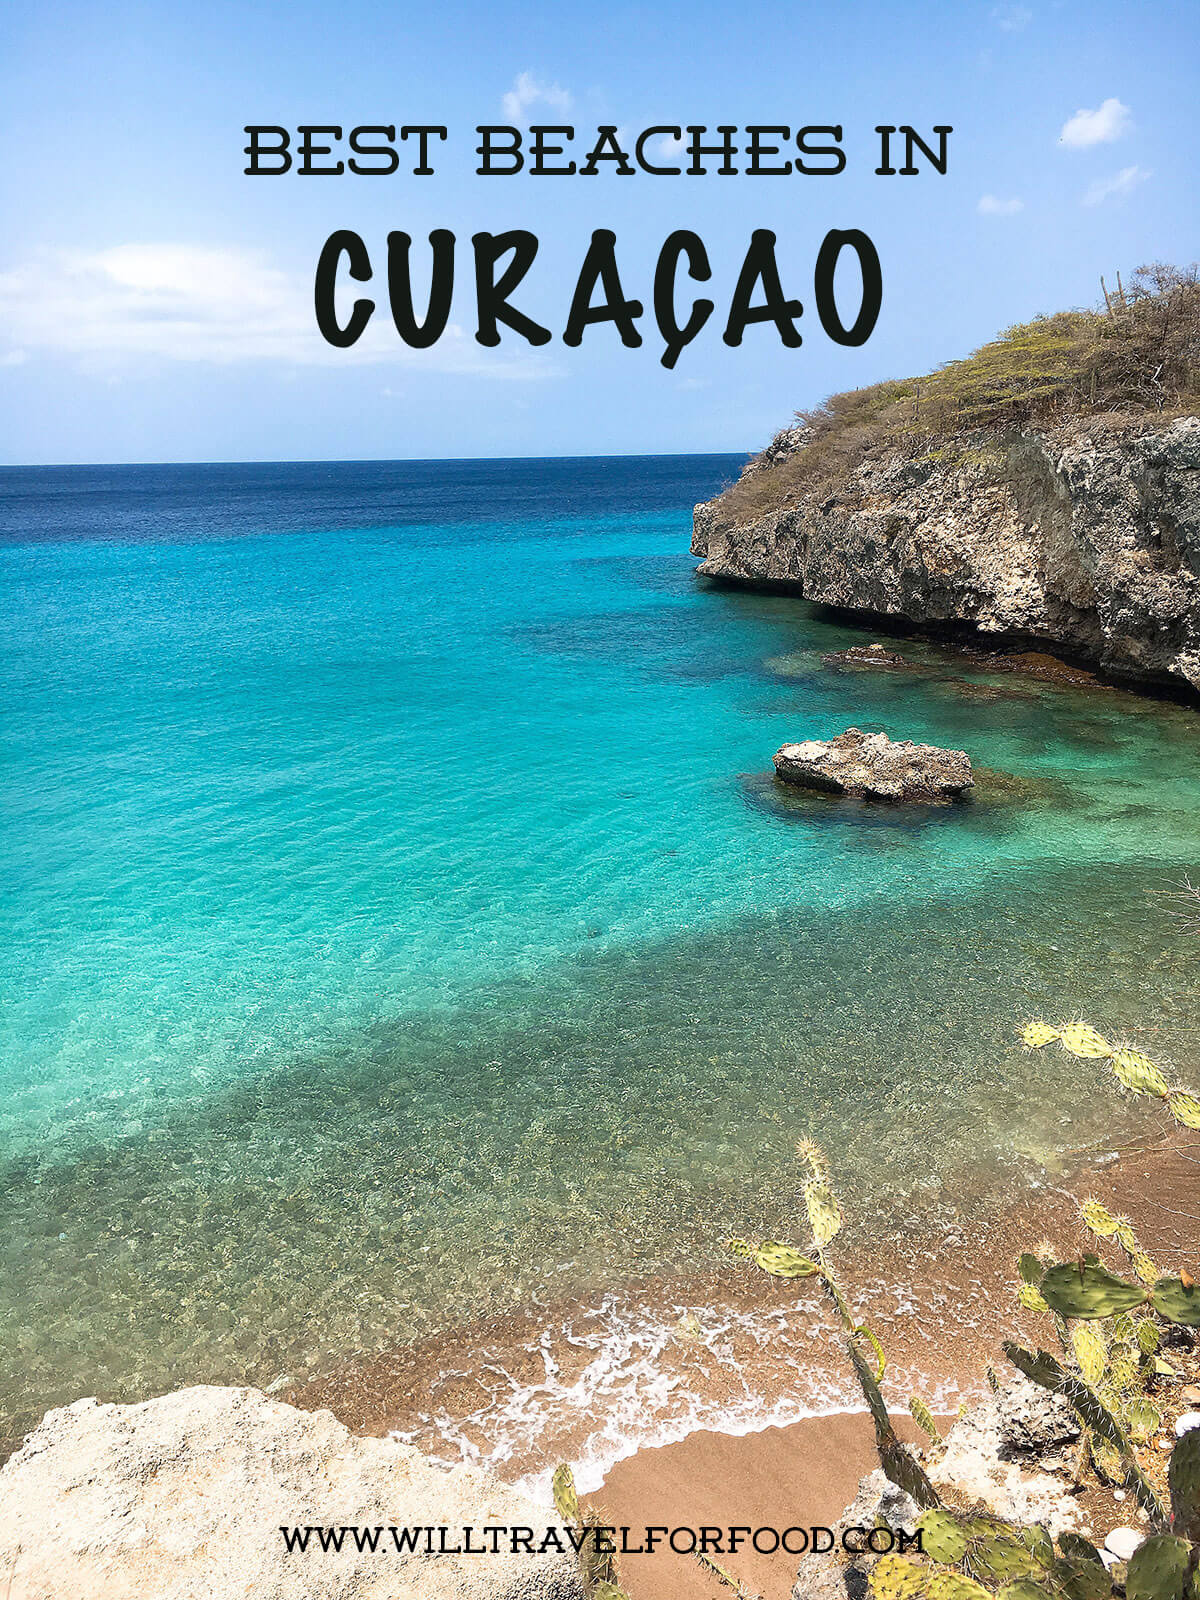 curacao best beaches © Will Travel for Food